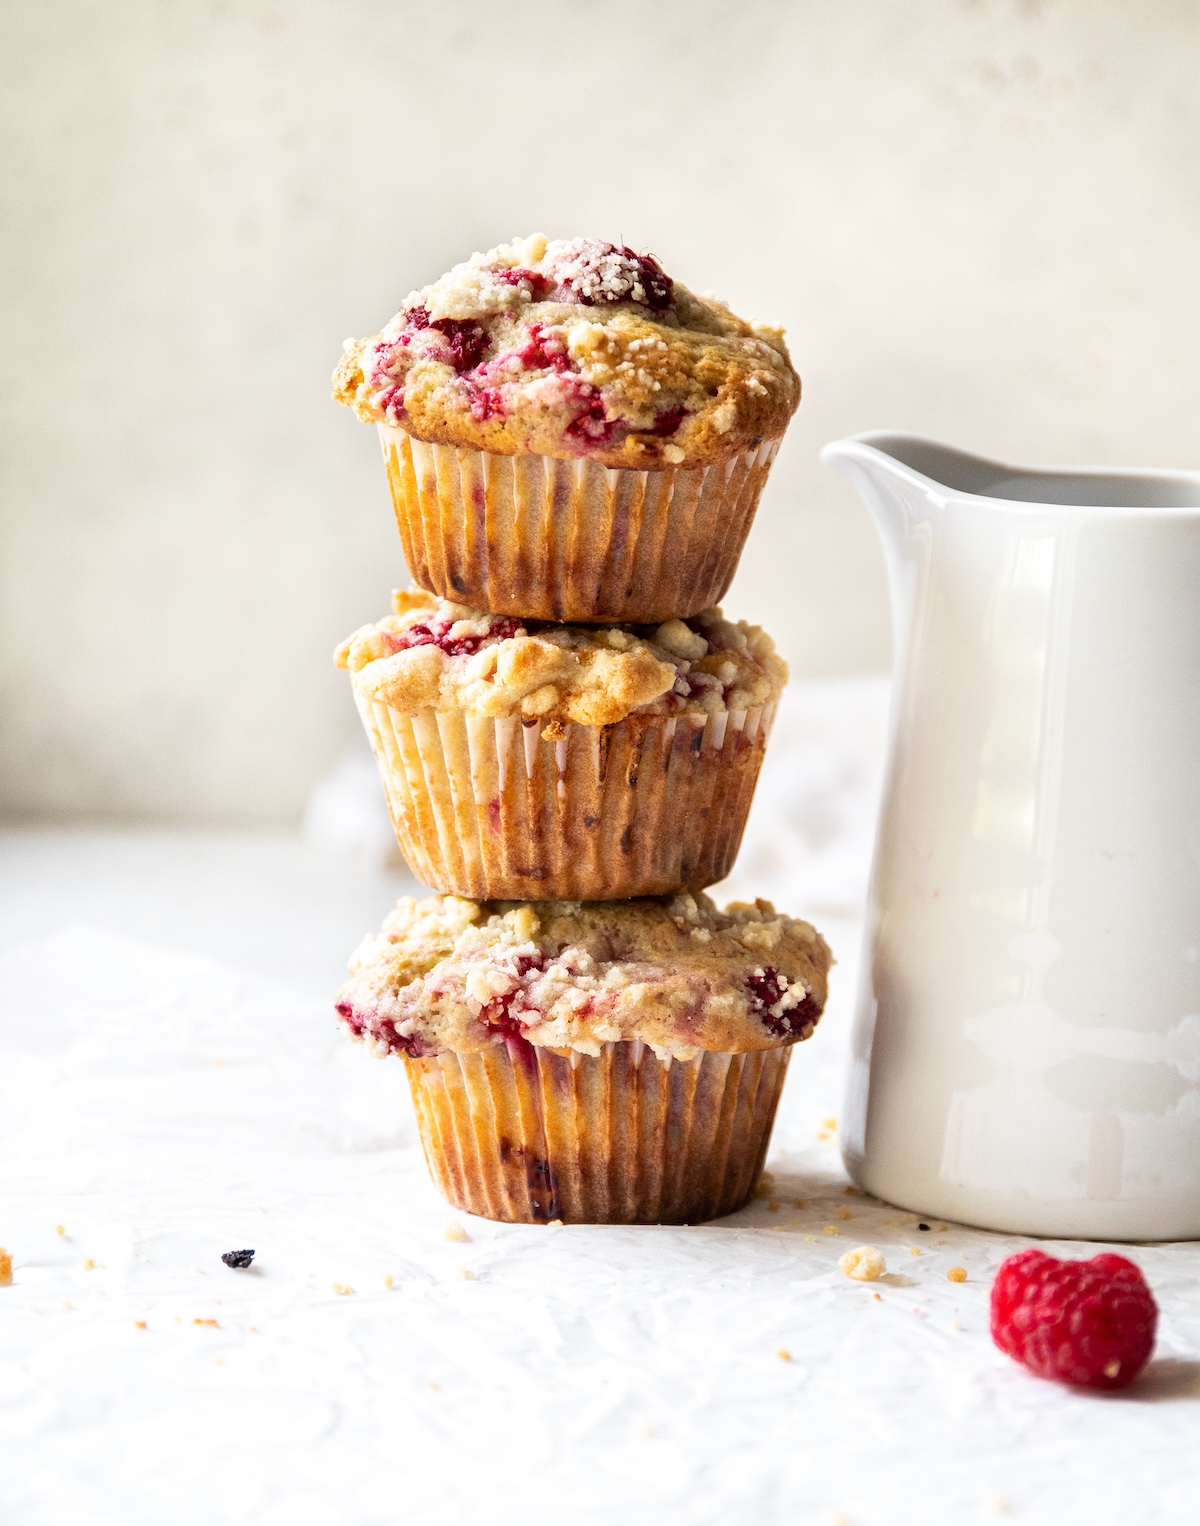 Three muffins stacked next to a white pitcher.